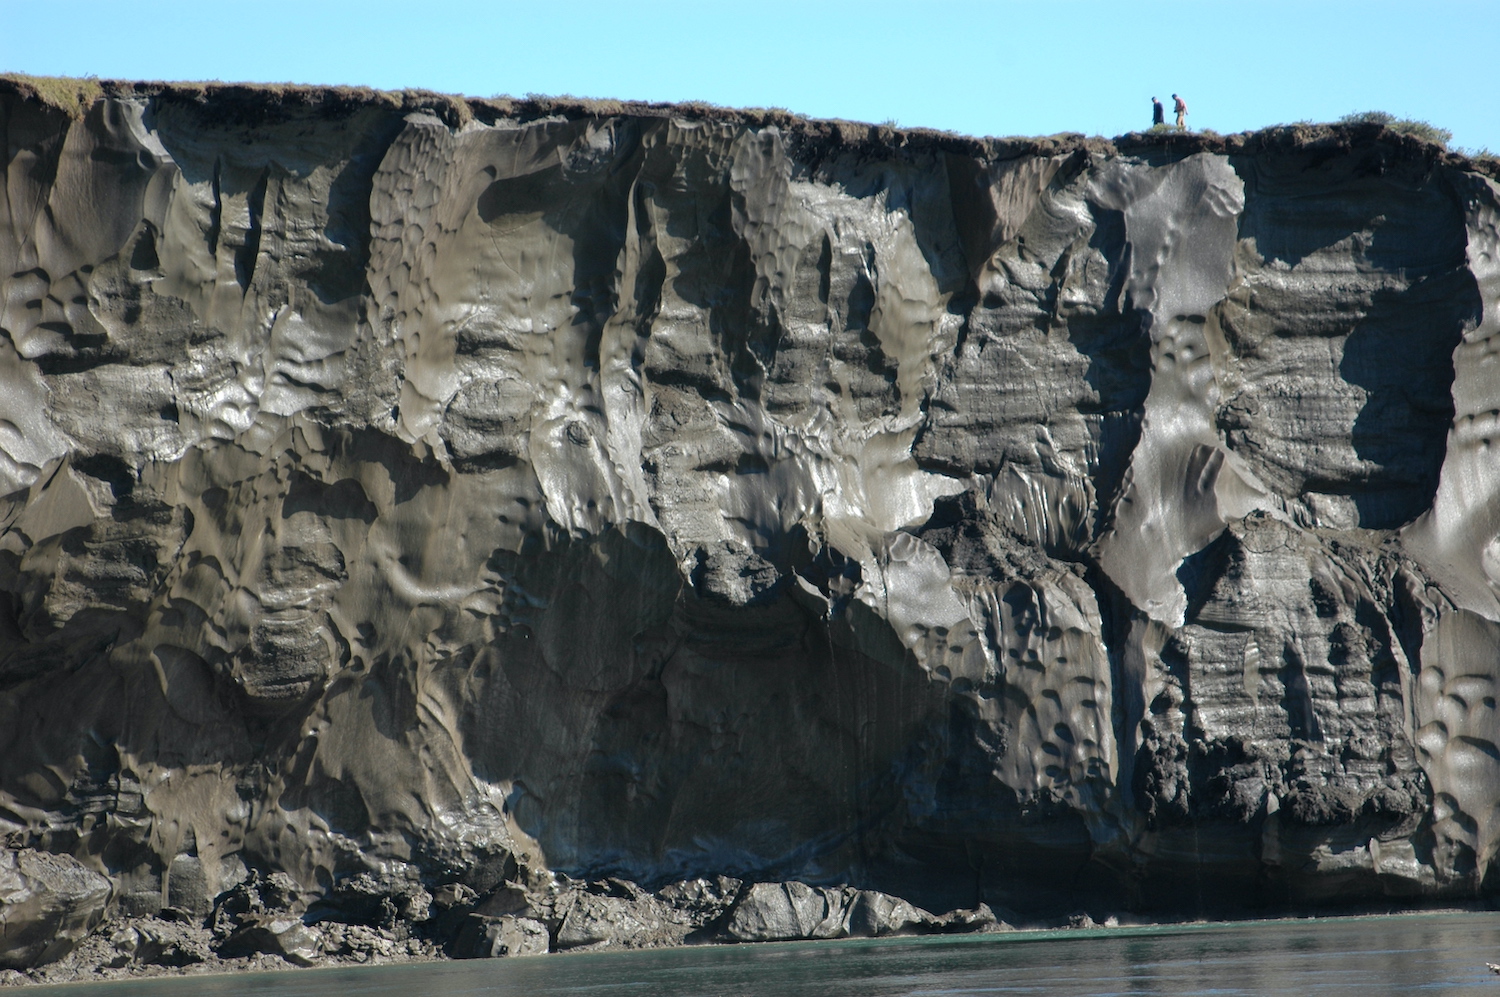 A frozen wall of icy mud rises above a water body. Two people walk along the top of the wall.